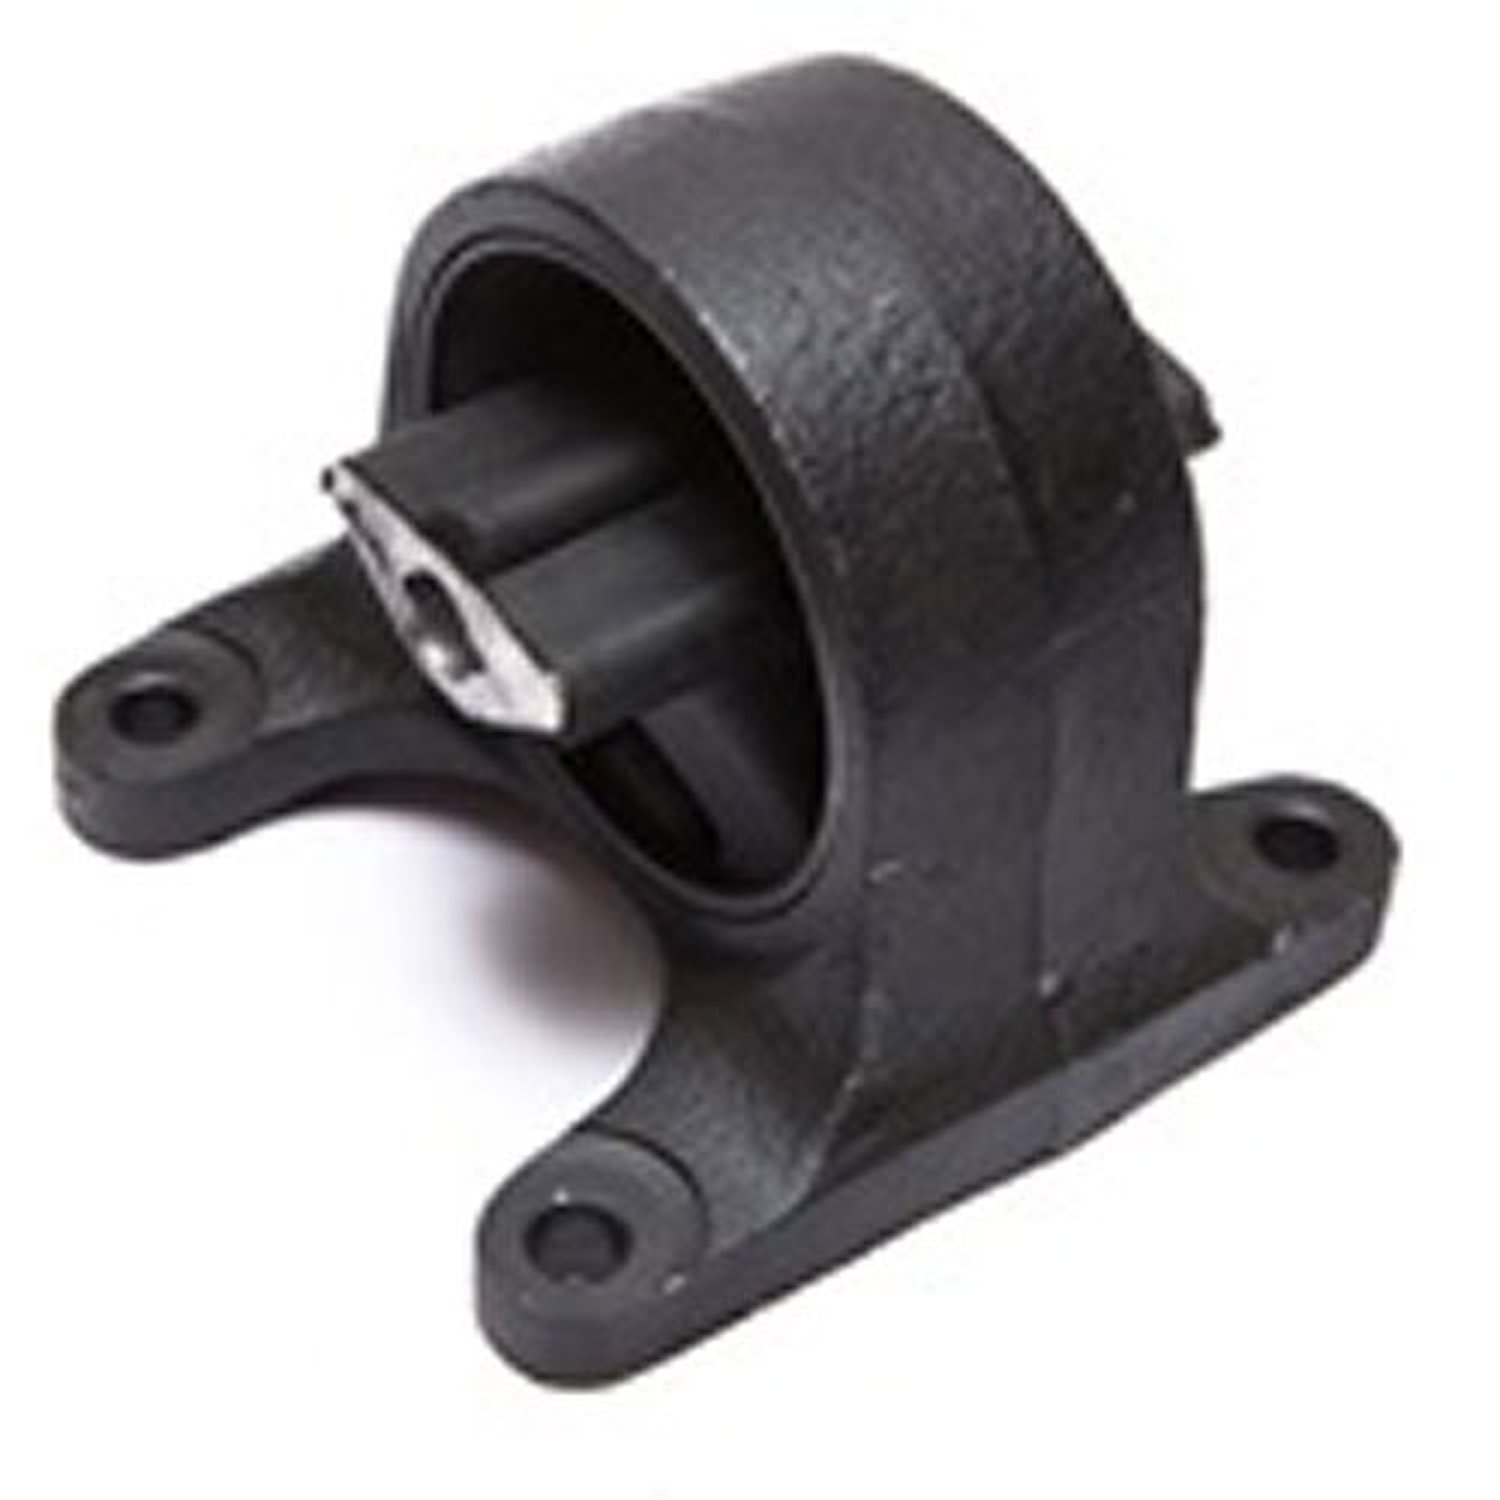 Stock replacement transmission mount from Omix-ADA, Fits 99-04 Jeep Grand Cherokee WJ with a V8 engine.